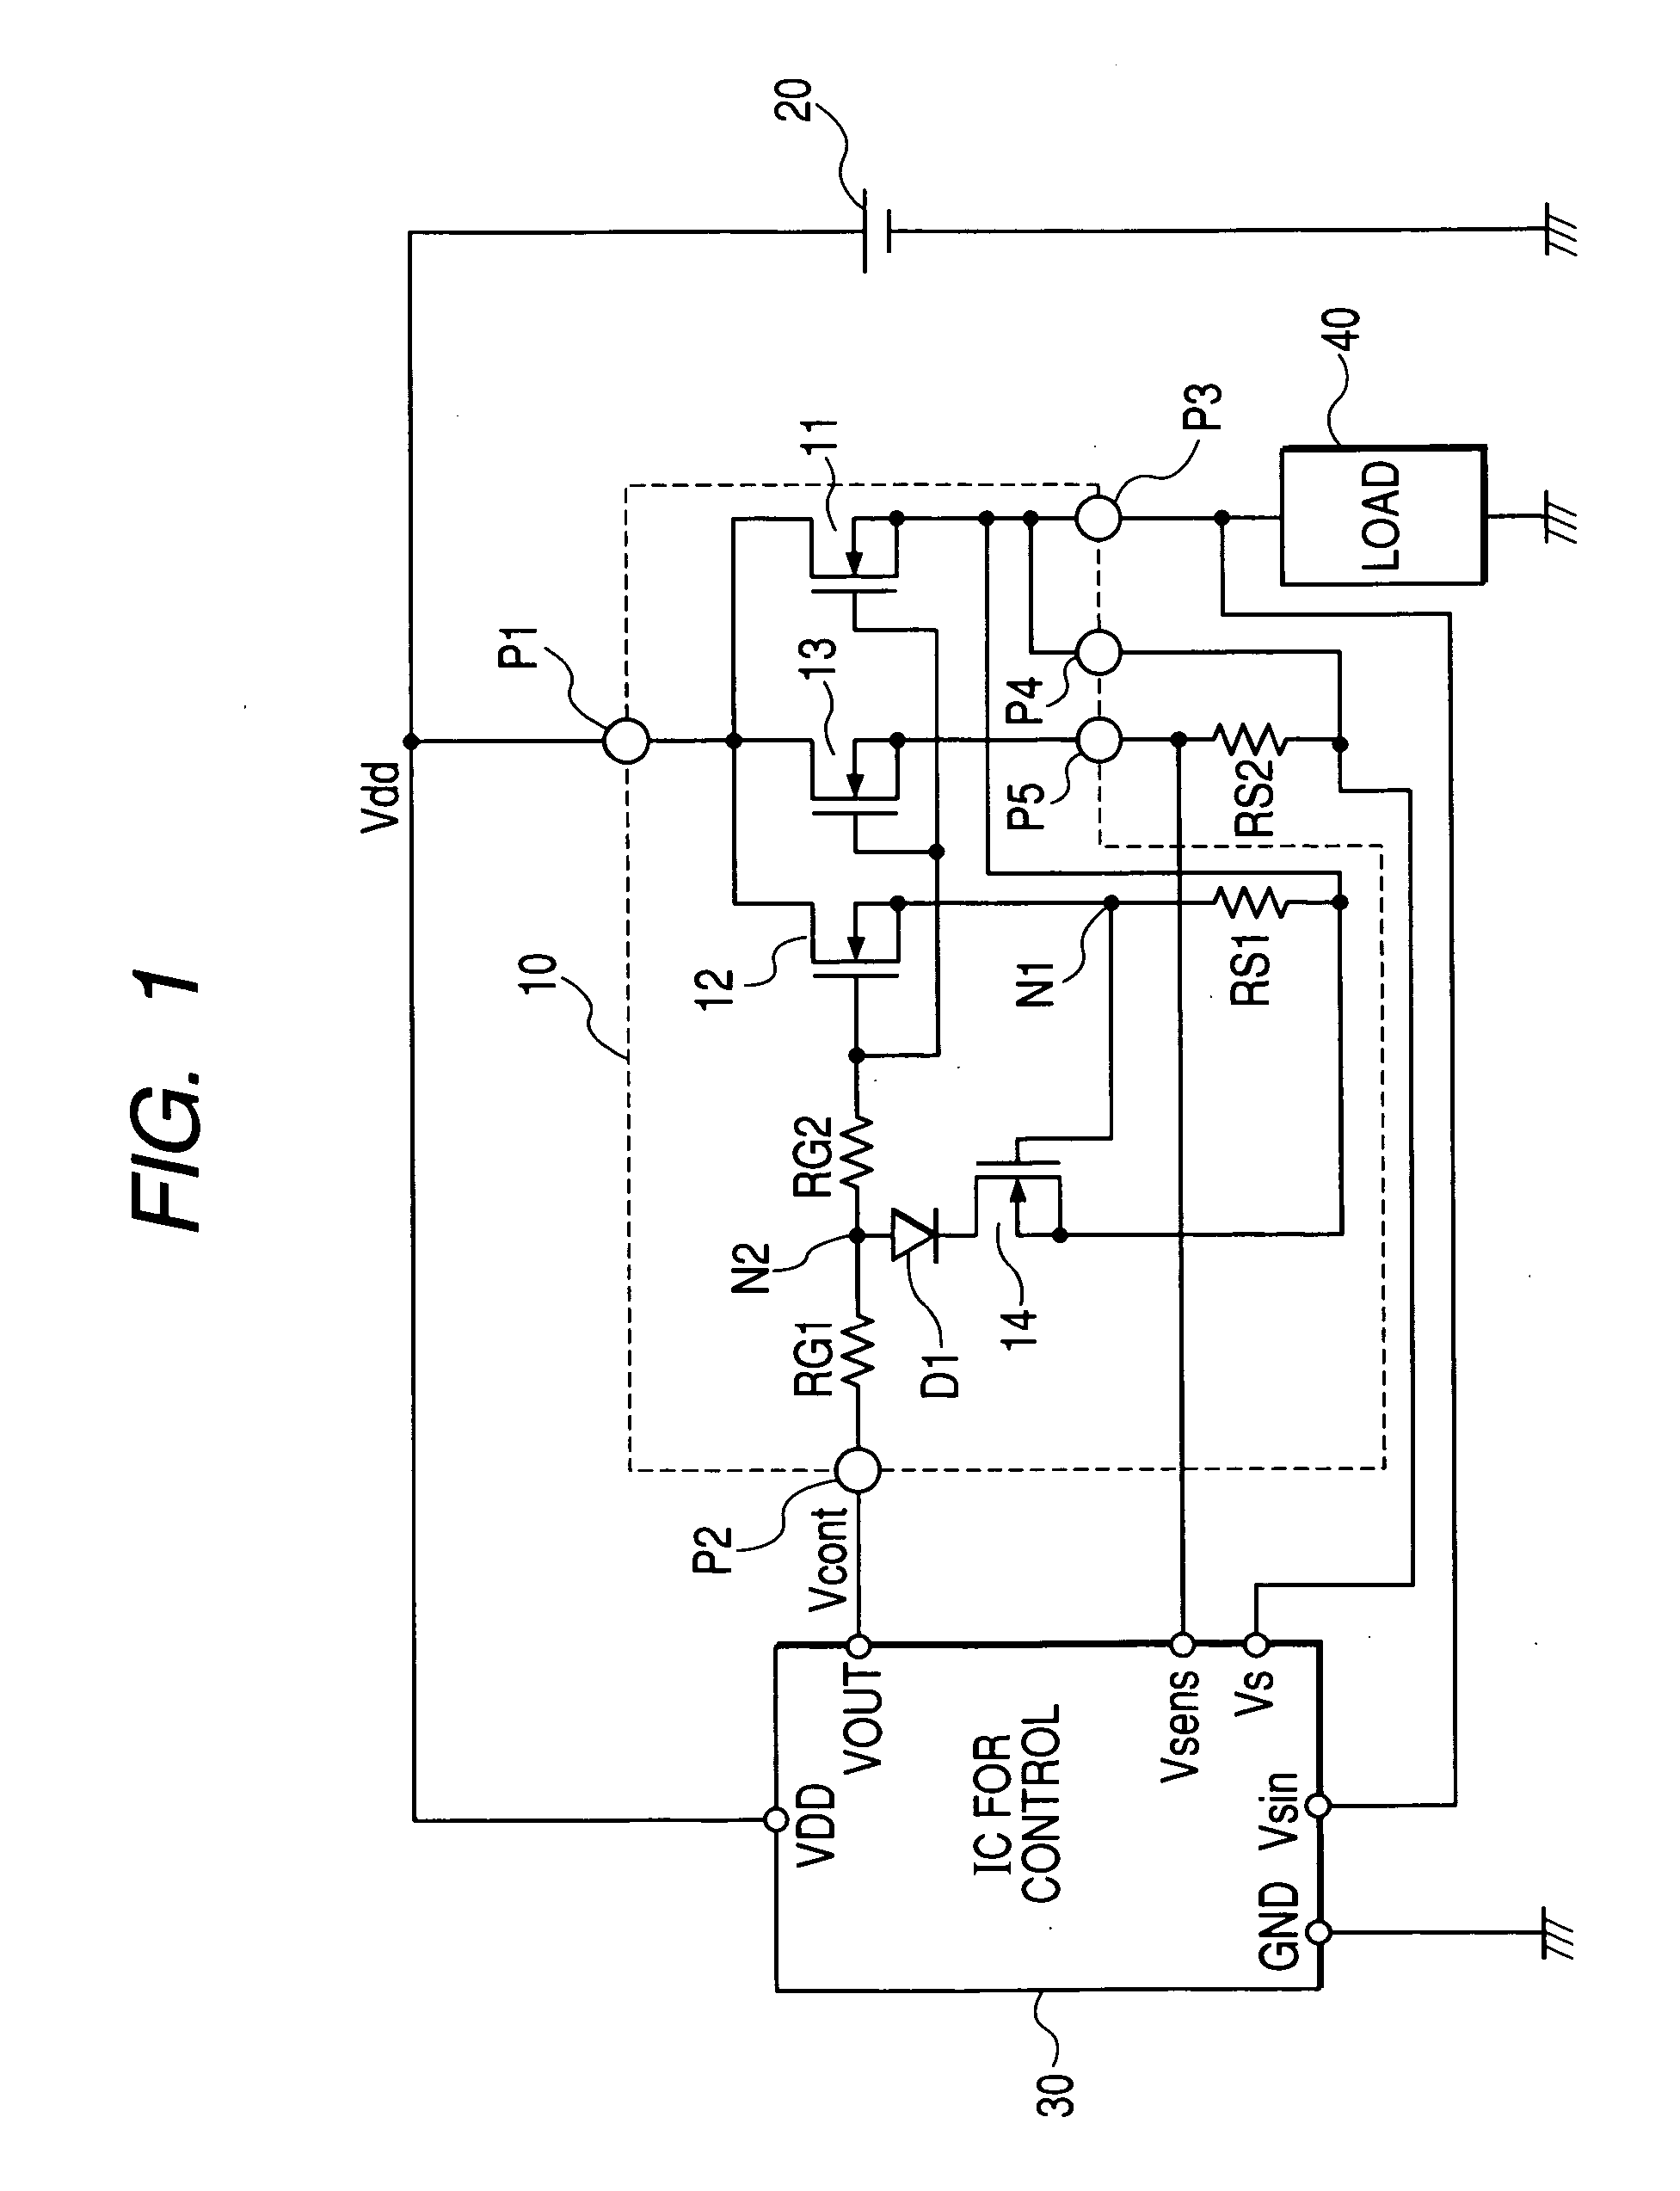 Power transistor device and a power control system for using it